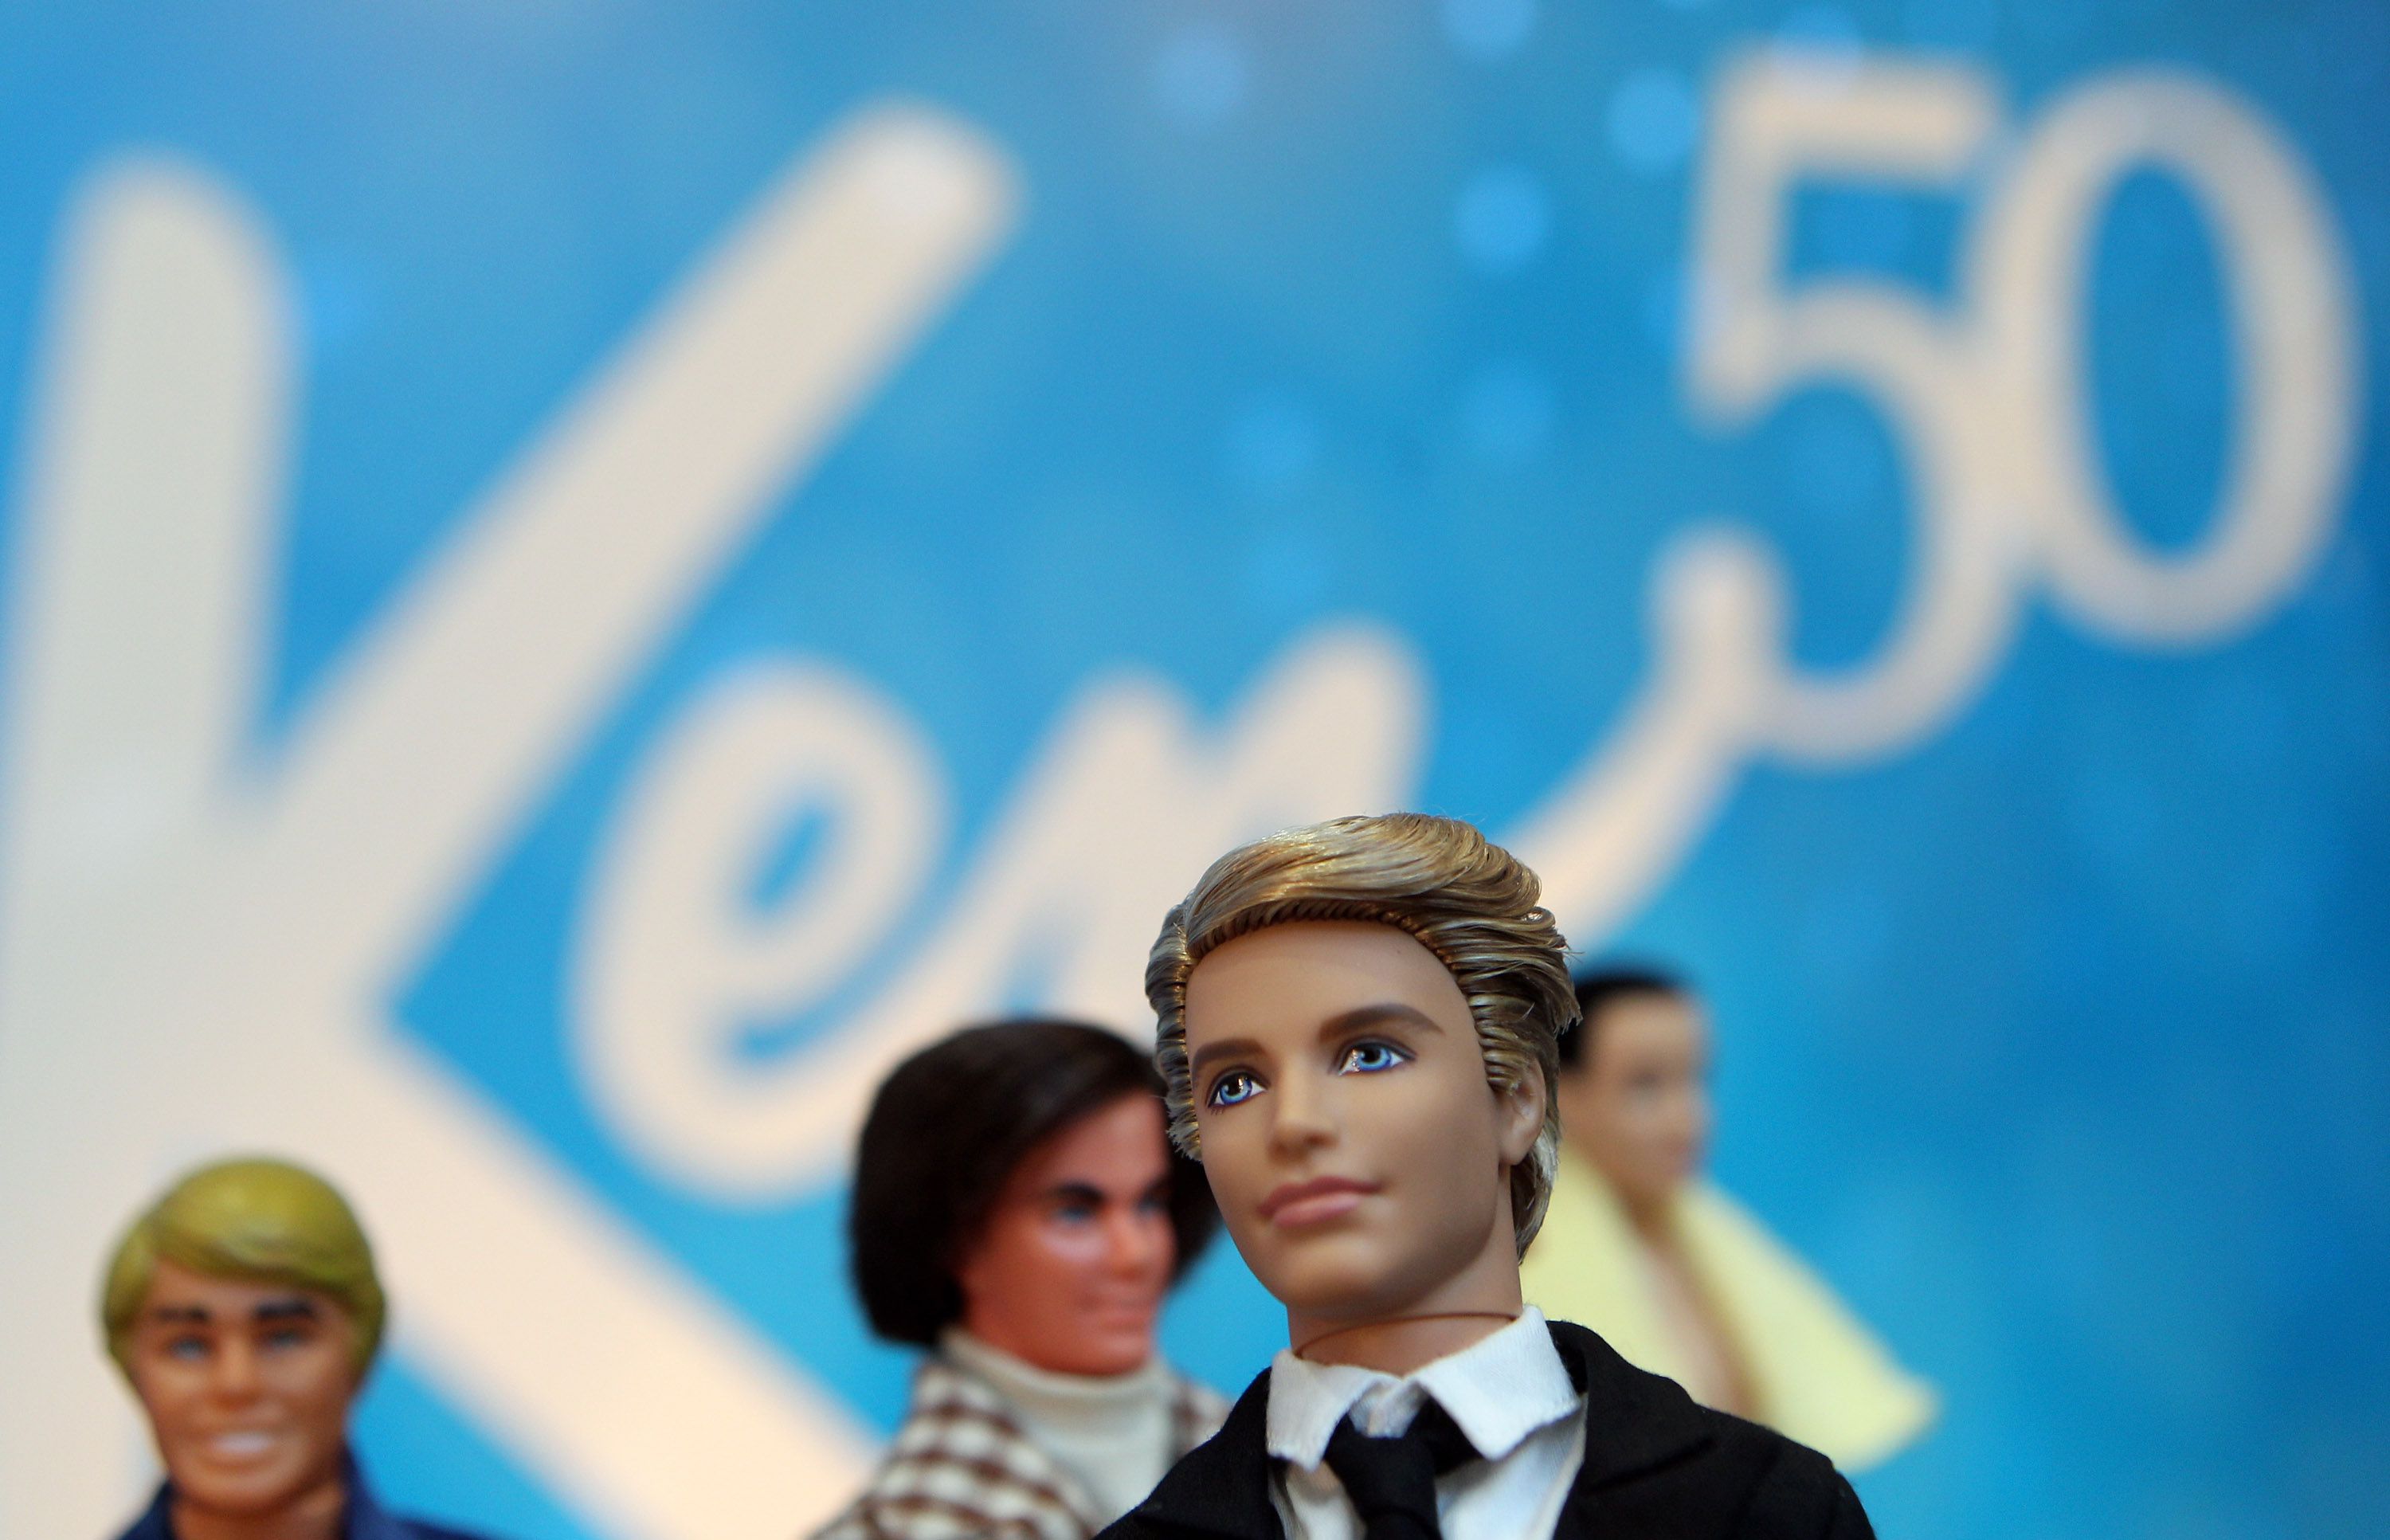 A Ken doll at the International Toy Fair in Nuernberg, Germany on Feb. 2, 2011. (Miguel Villagran—Getty Images)